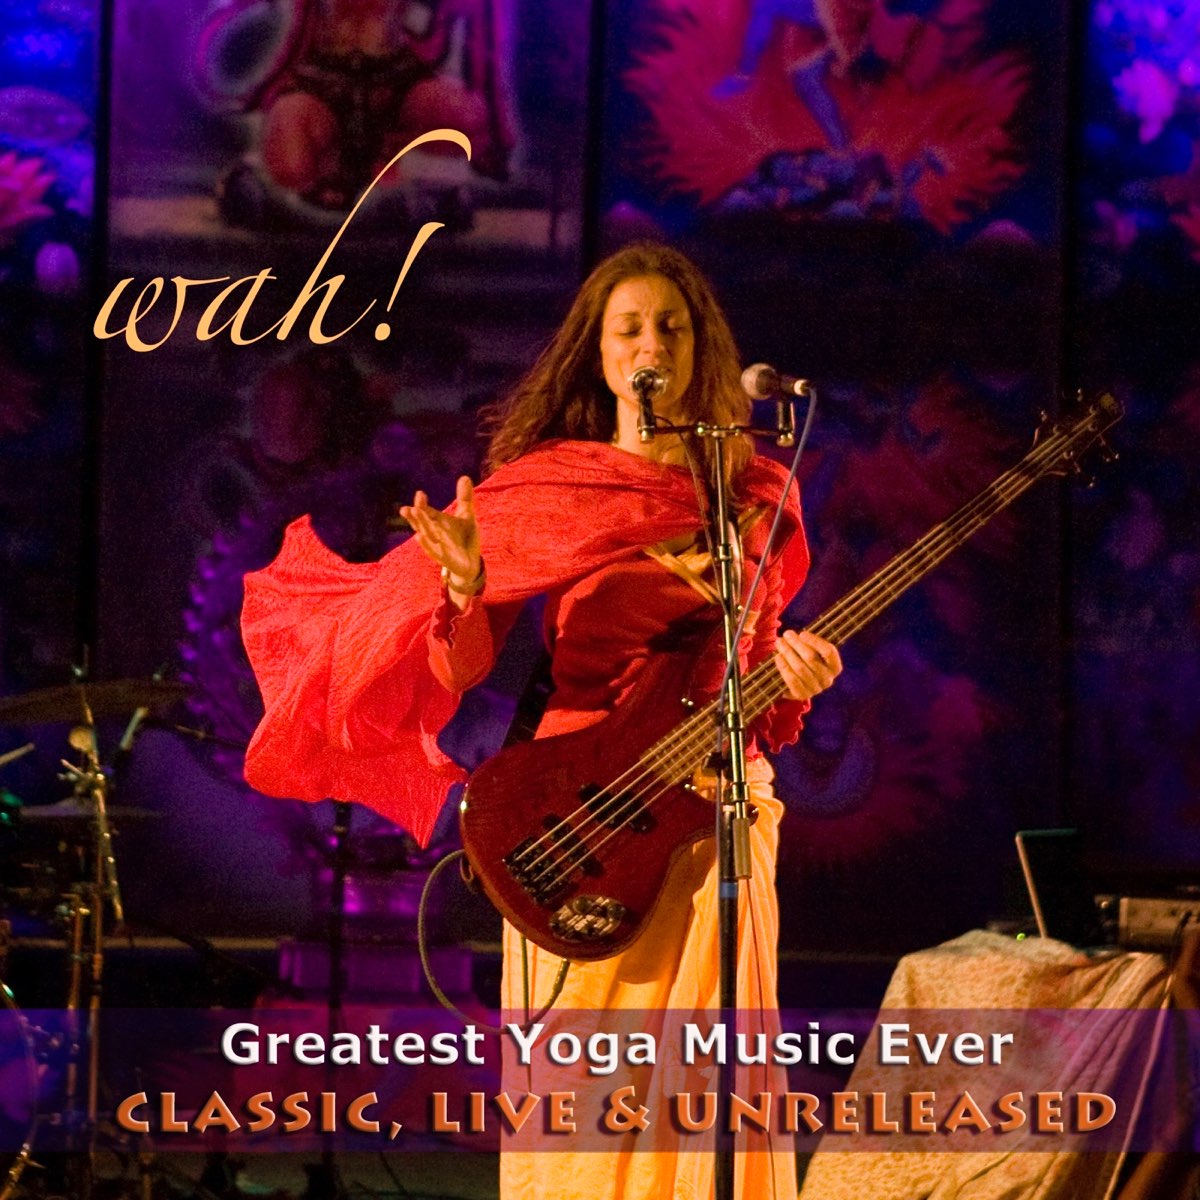 Greatest Yoga Music Ever - Classic, Live & Unreleased by Wah! on Apple Music